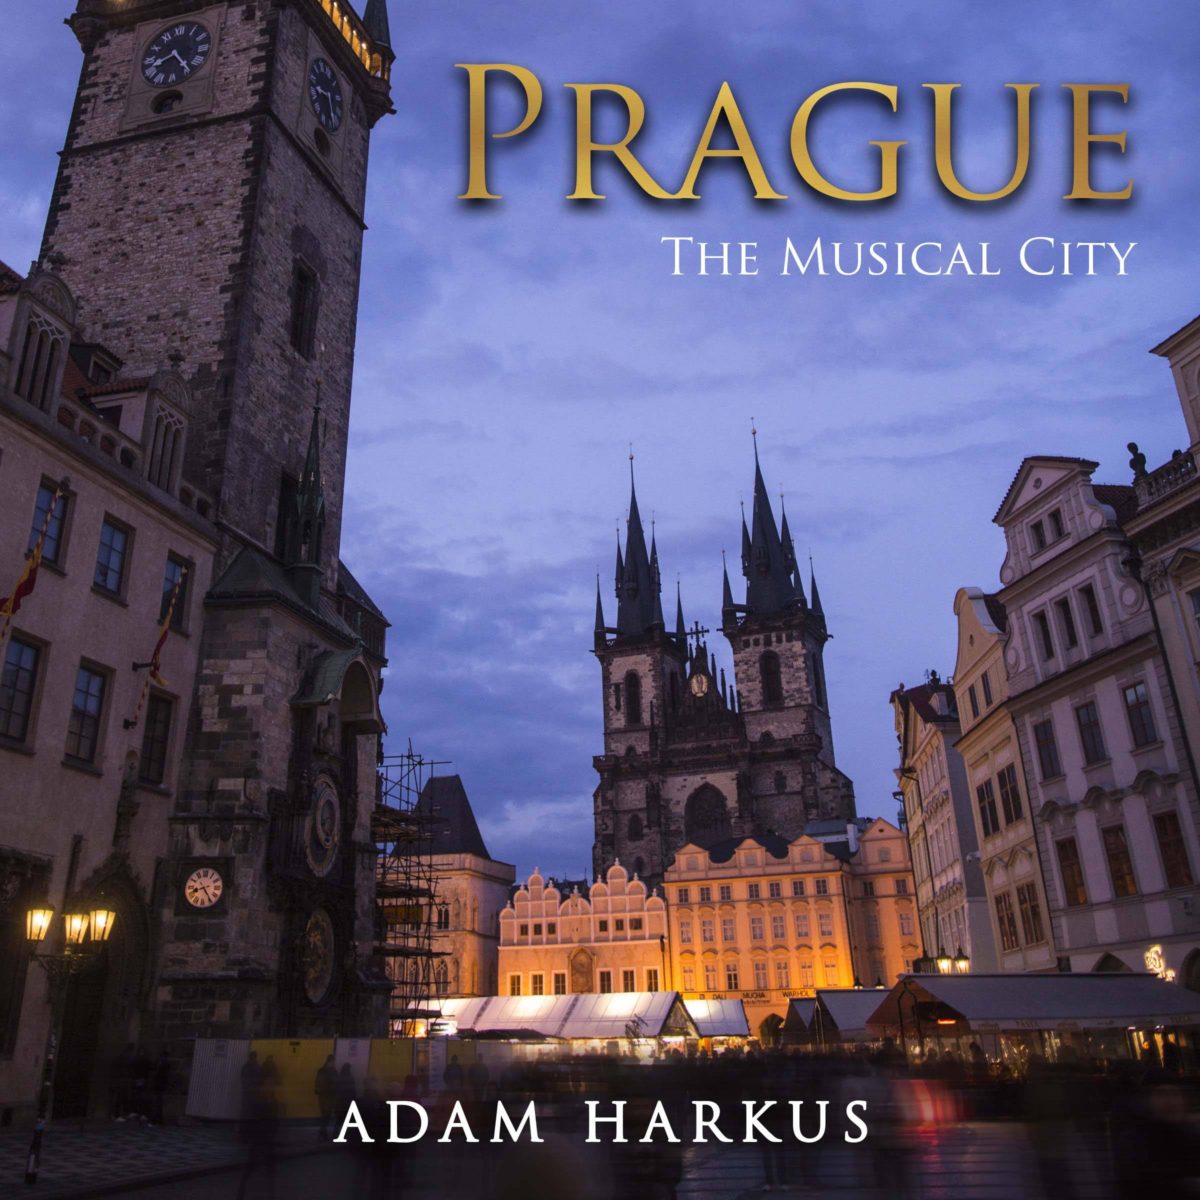 Prague: The Musical City. Special offer starts Today!!!